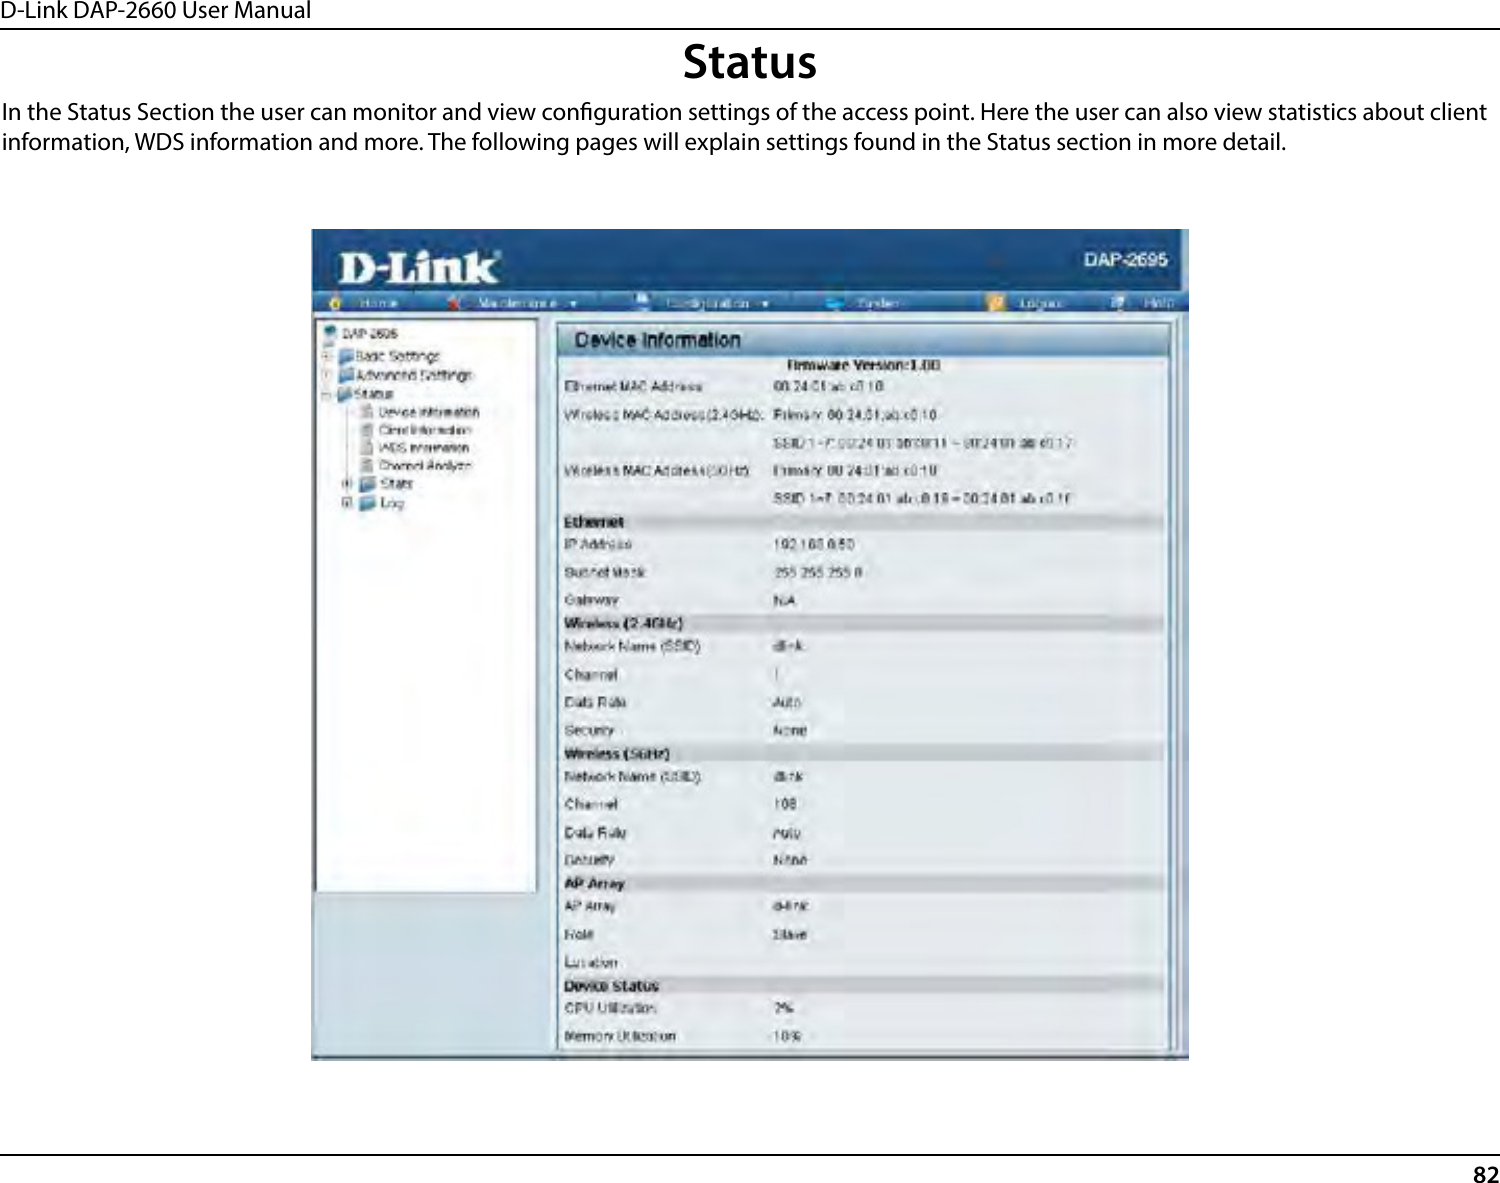 D-Link DAP-2660 User Manual82StatusIn the Status Section the user can monitor and view conguration settings of the access point. Here the user can also view statistics about client information, WDS information and more. The following pages will explain settings found in the Status section in more detail.